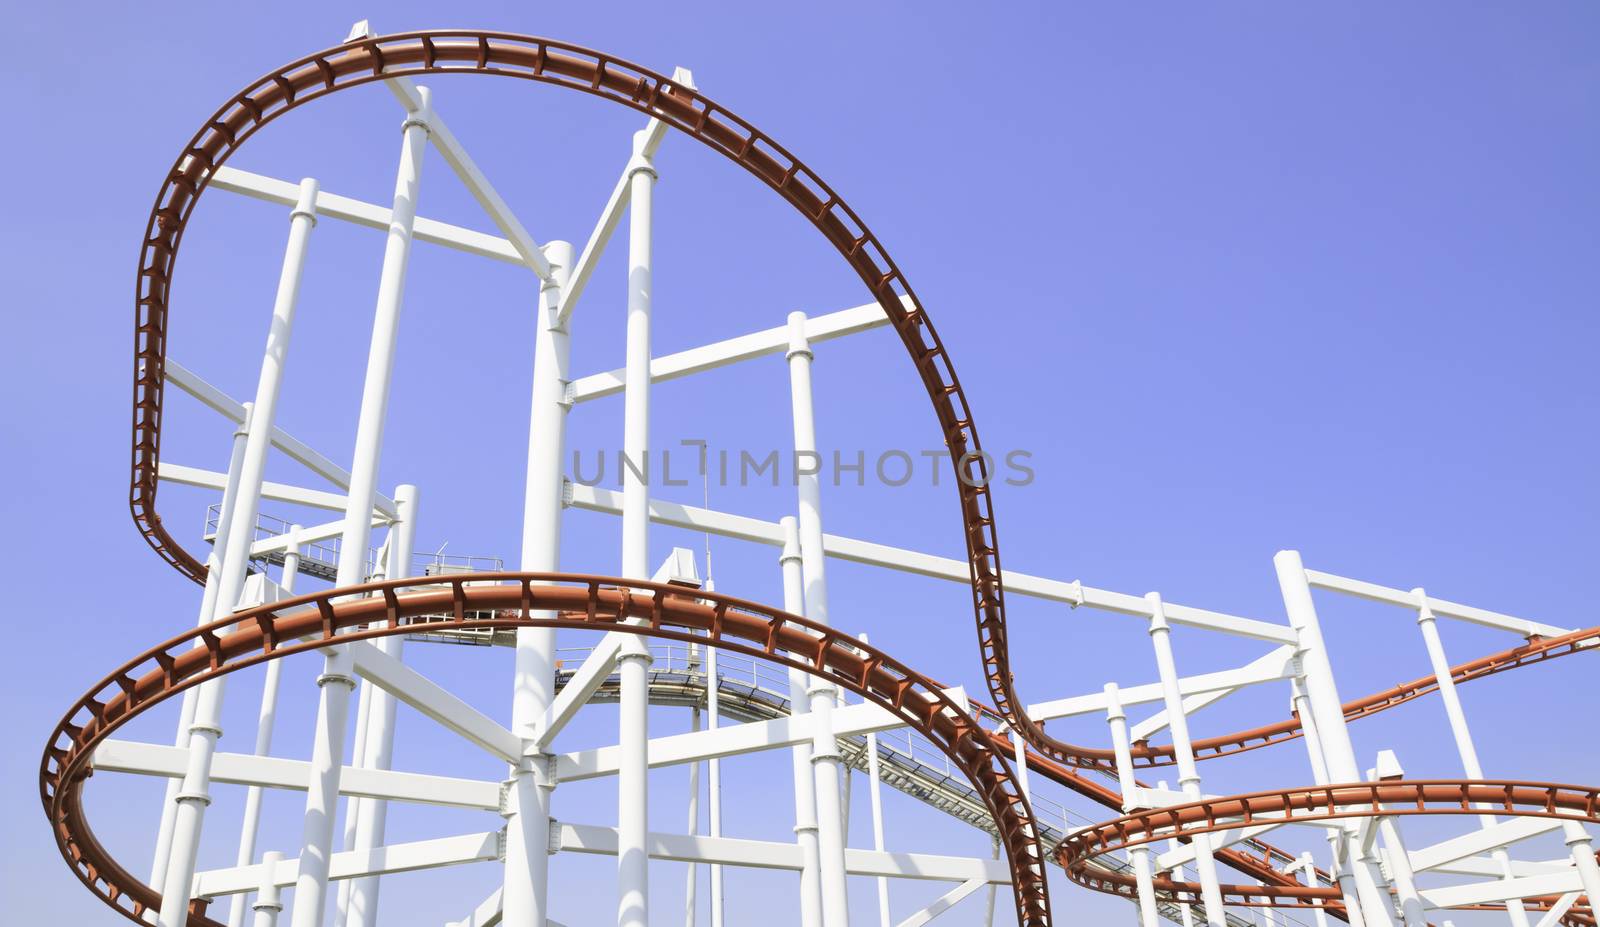 The loops of a scaring roller coaster